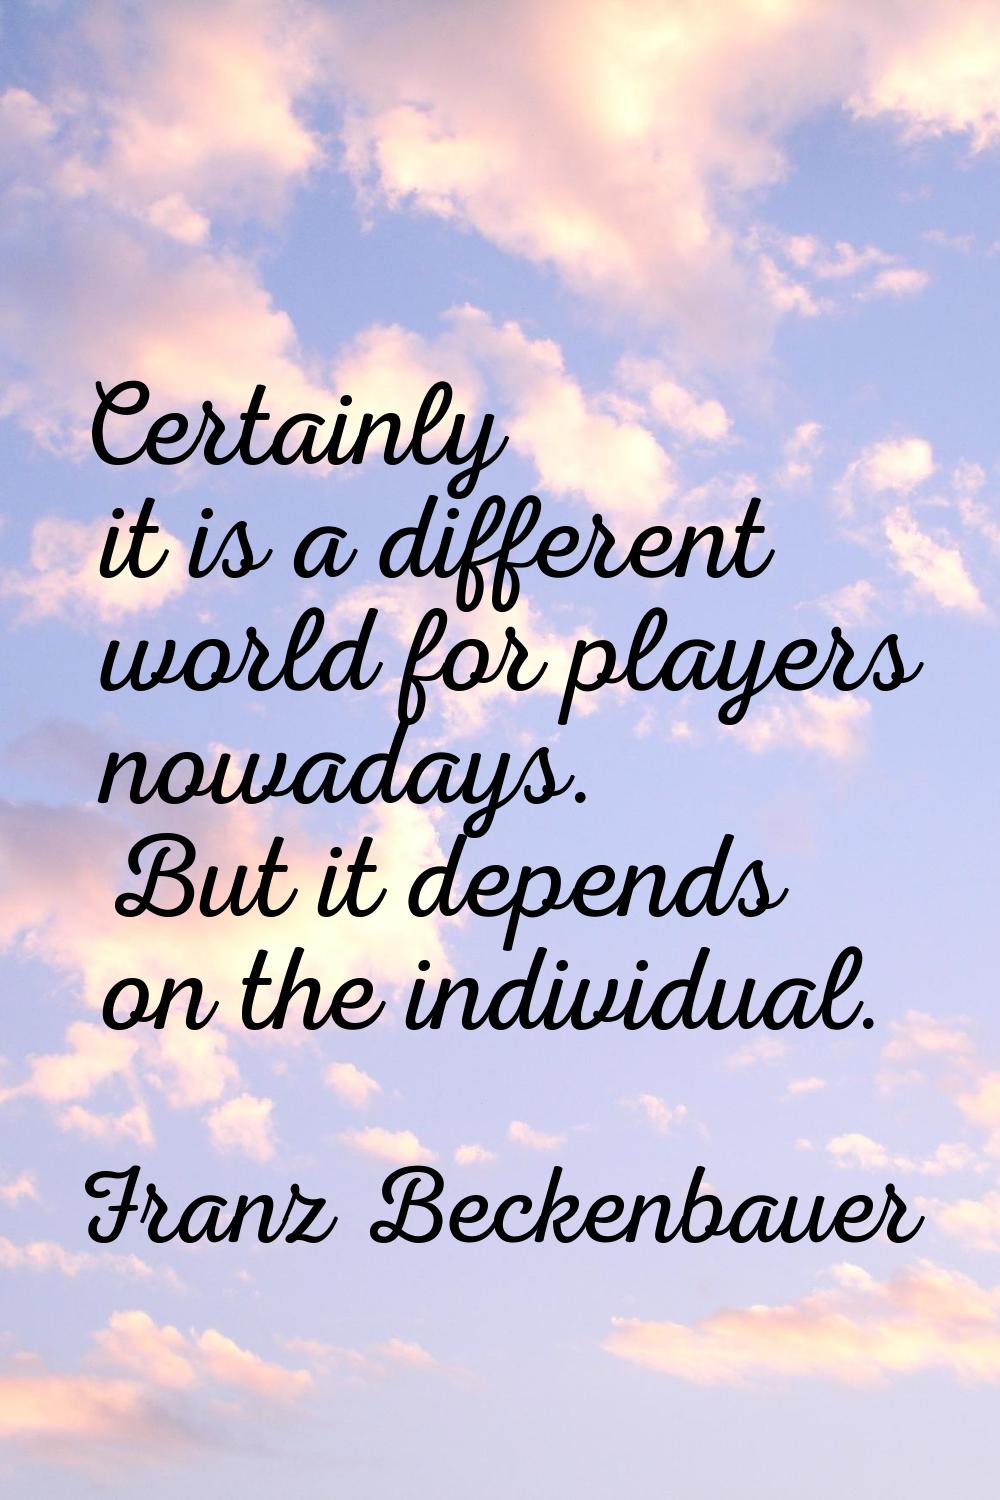 Certainly it is a different world for players nowadays. But it depends on the individual.